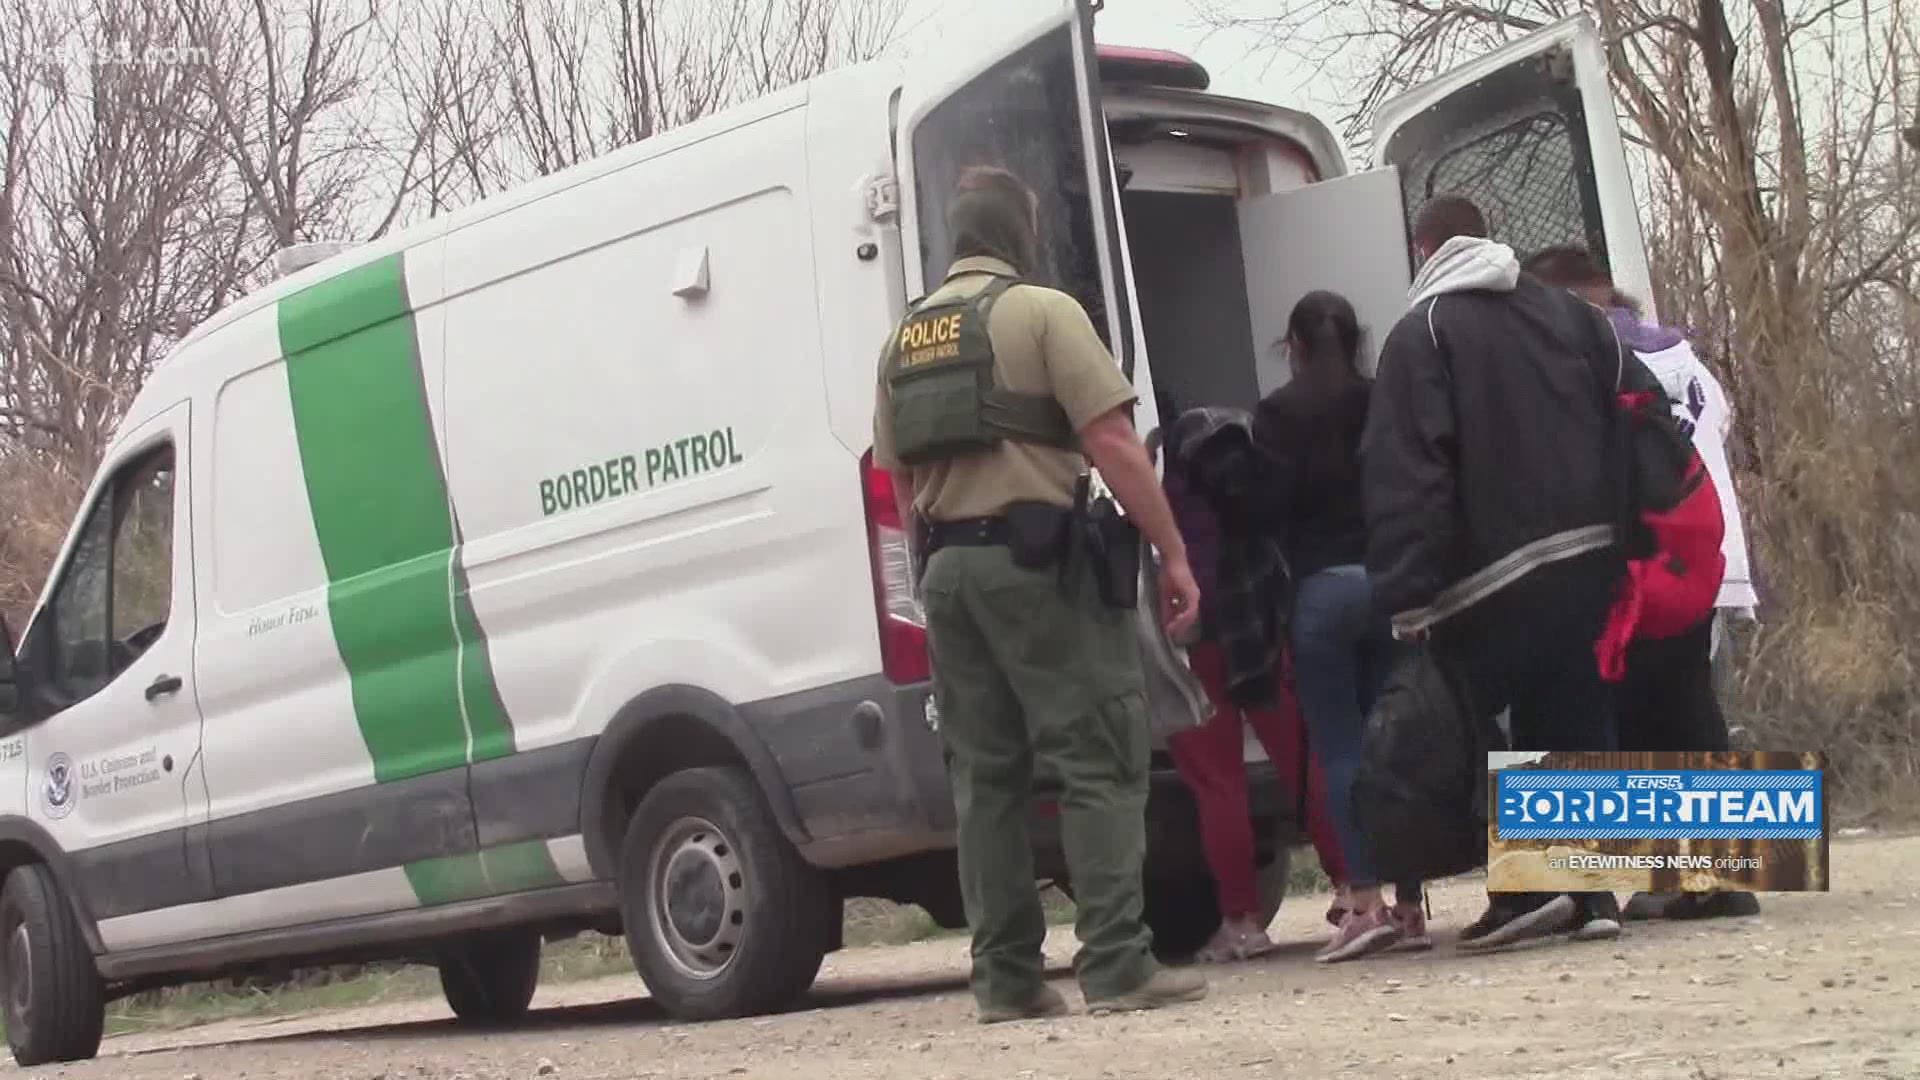 To the criminal organizations fueling this surge, business is booming, Border Patrol says.